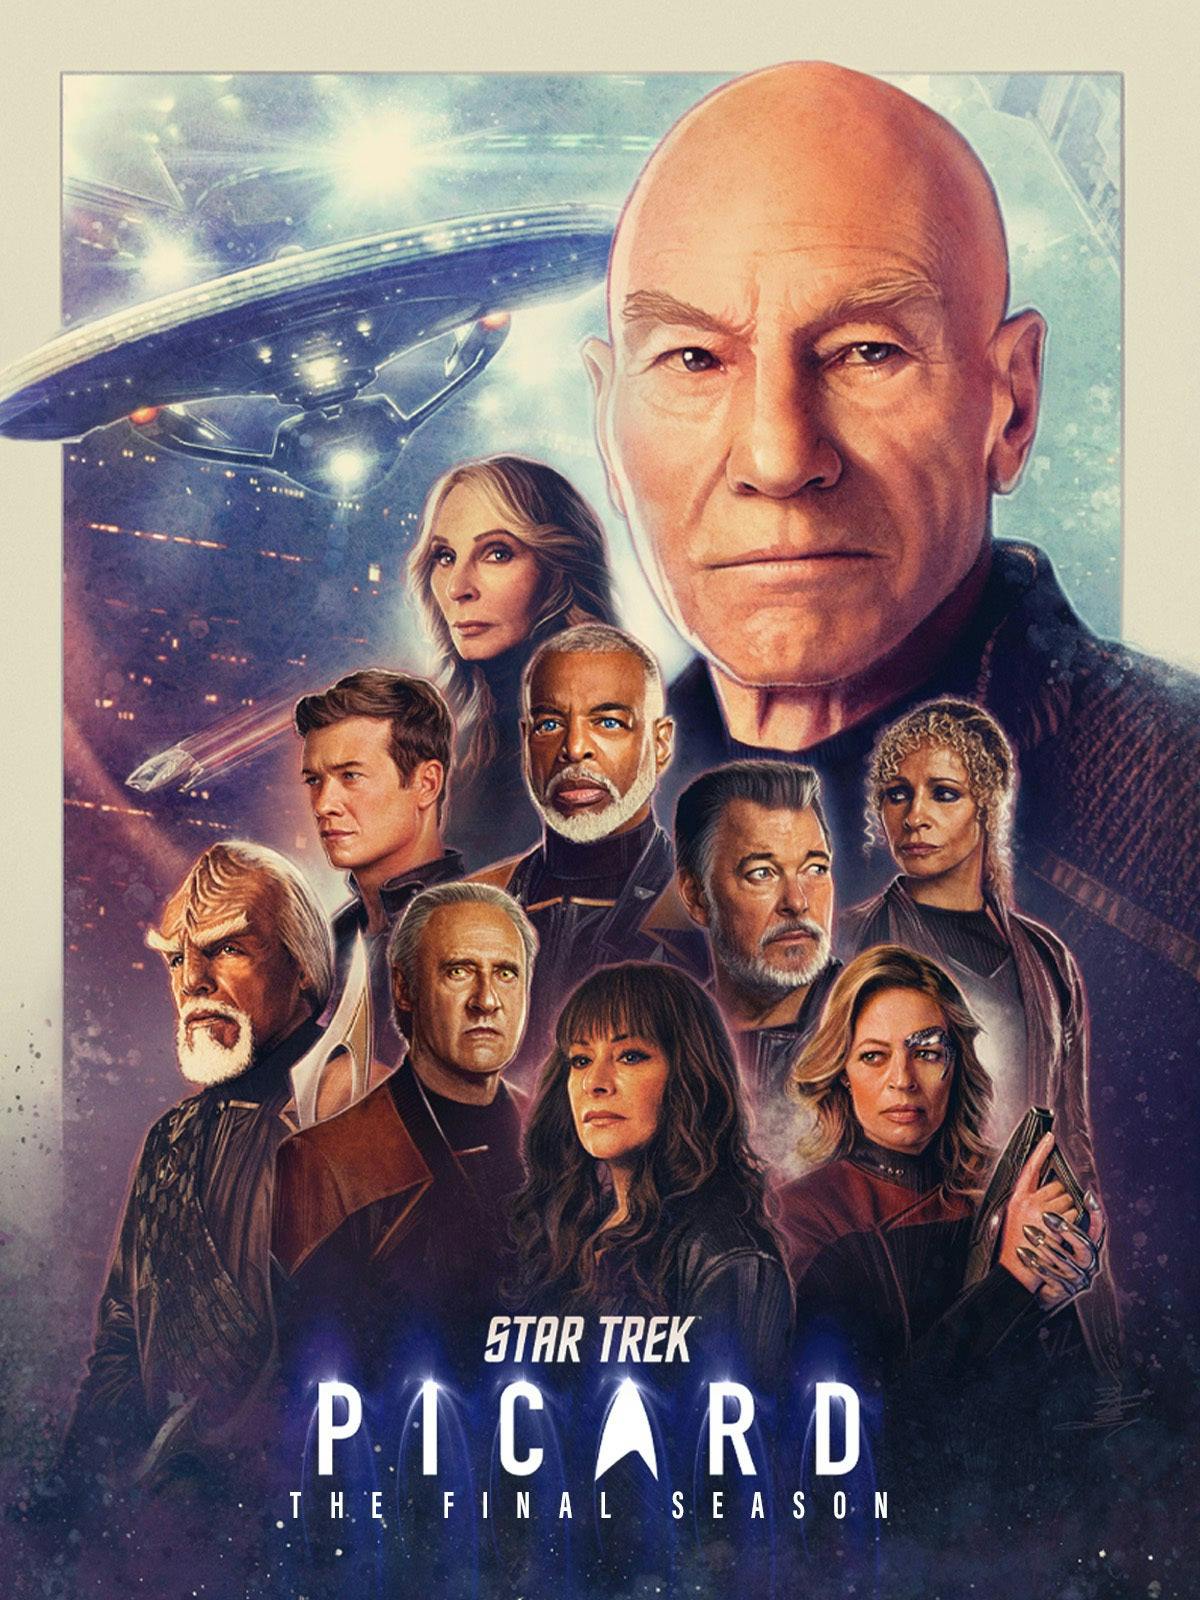 Star Trek: Picard Season 3 Ensemble Art featuring Jean-Luc Picard, Beverly Crusher, Worf, Lore, Deanna Troi, Will Riker, Raffi, Seven of Nine, and Ed Speelers' character, including the U.S.S. Titan